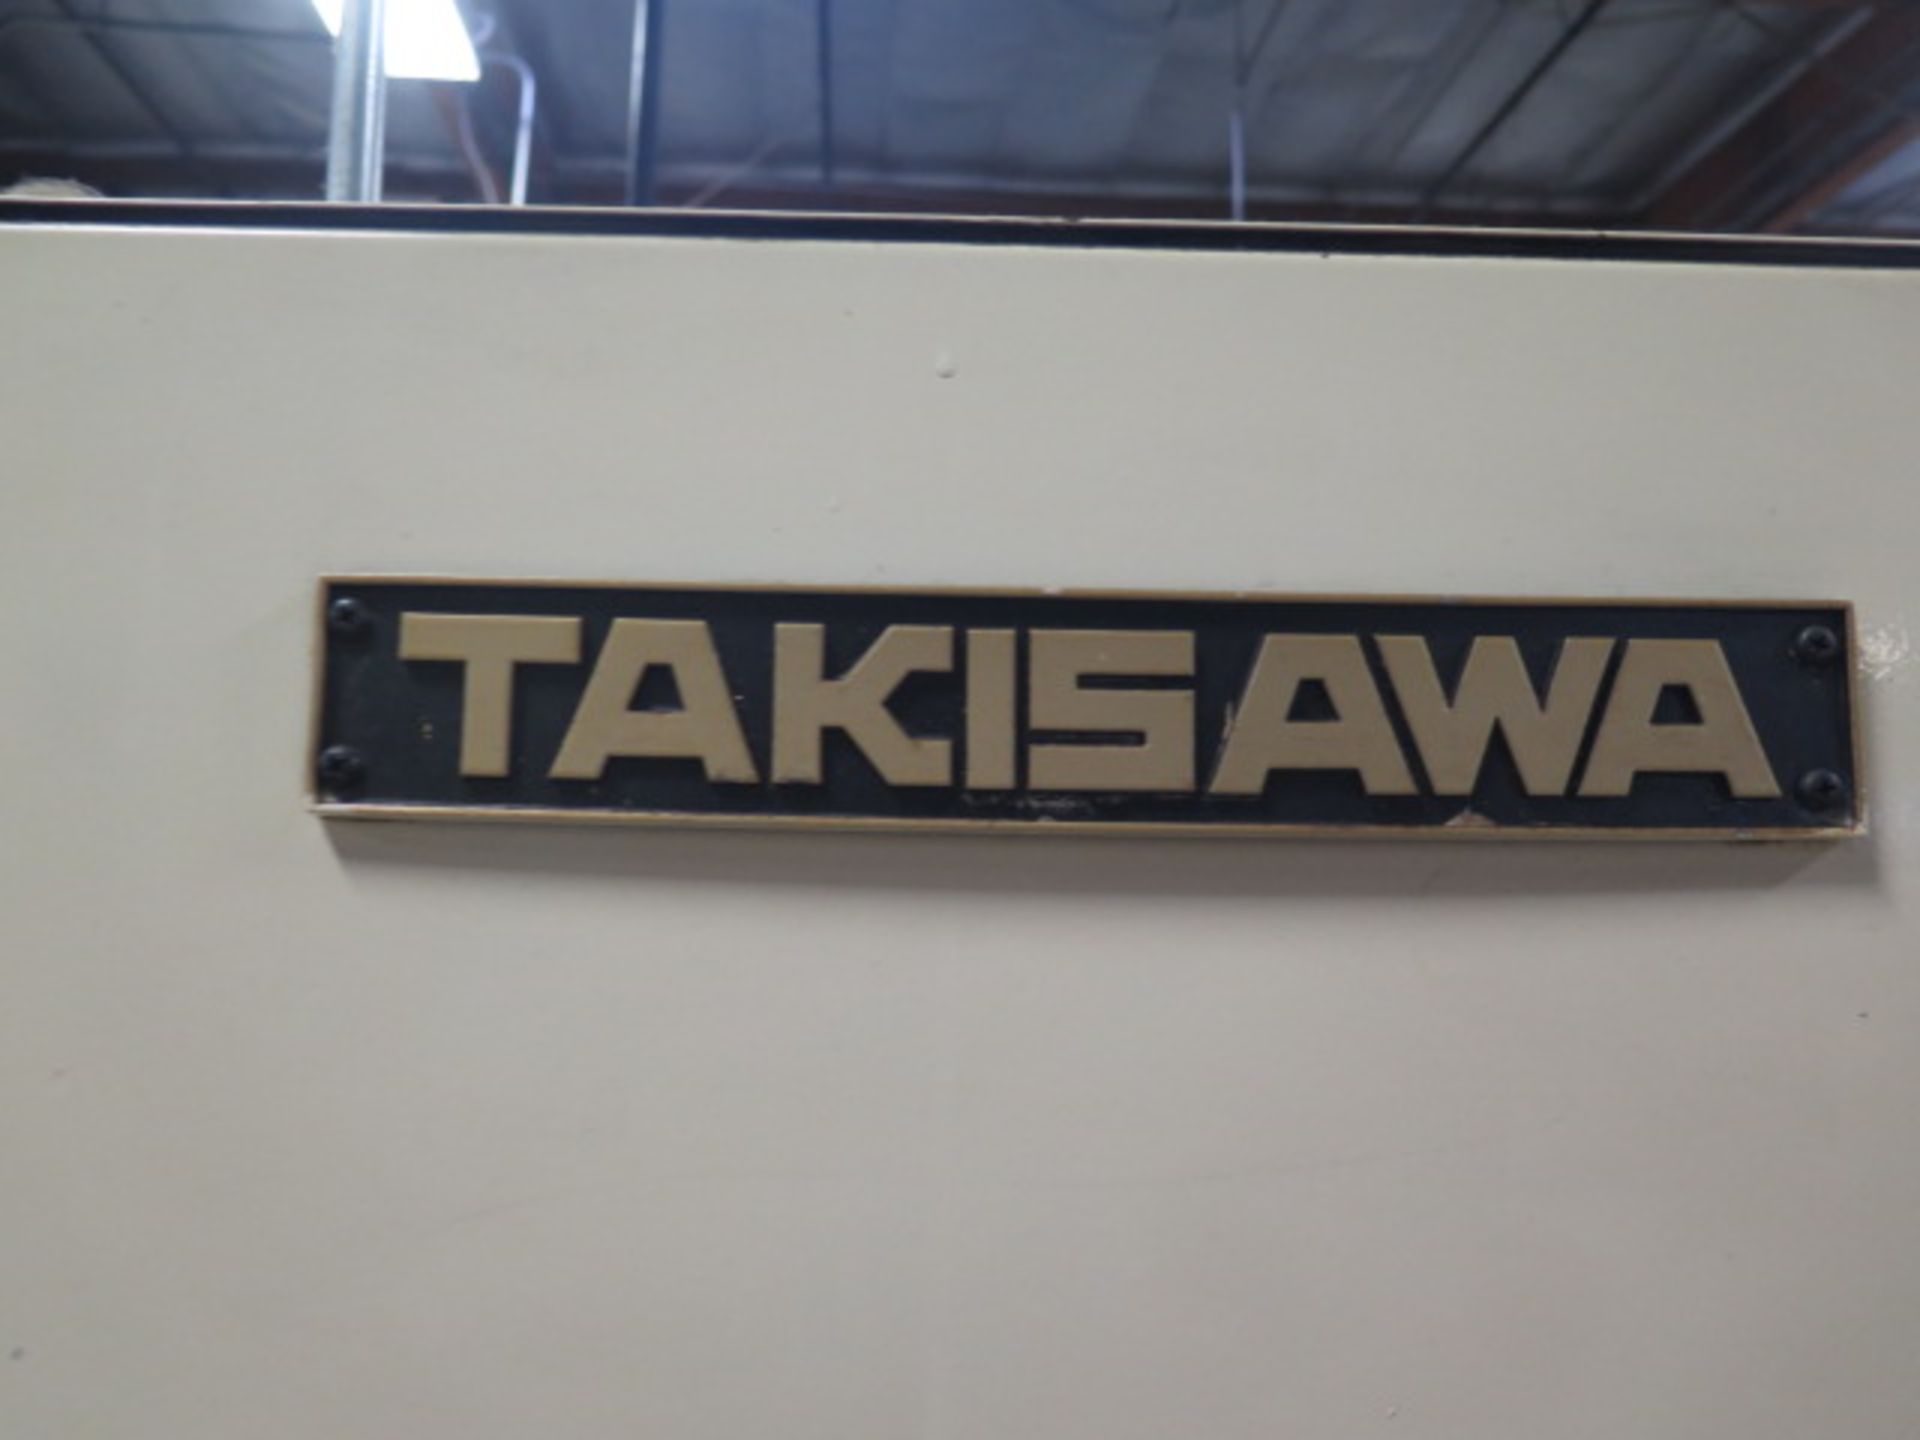 Takisawa TC-2 CNC Turning Center s/n THRDR-4431 w/ Fanuc Controls, 6-Station Turret, SOLD AS IS - Image 15 of 16